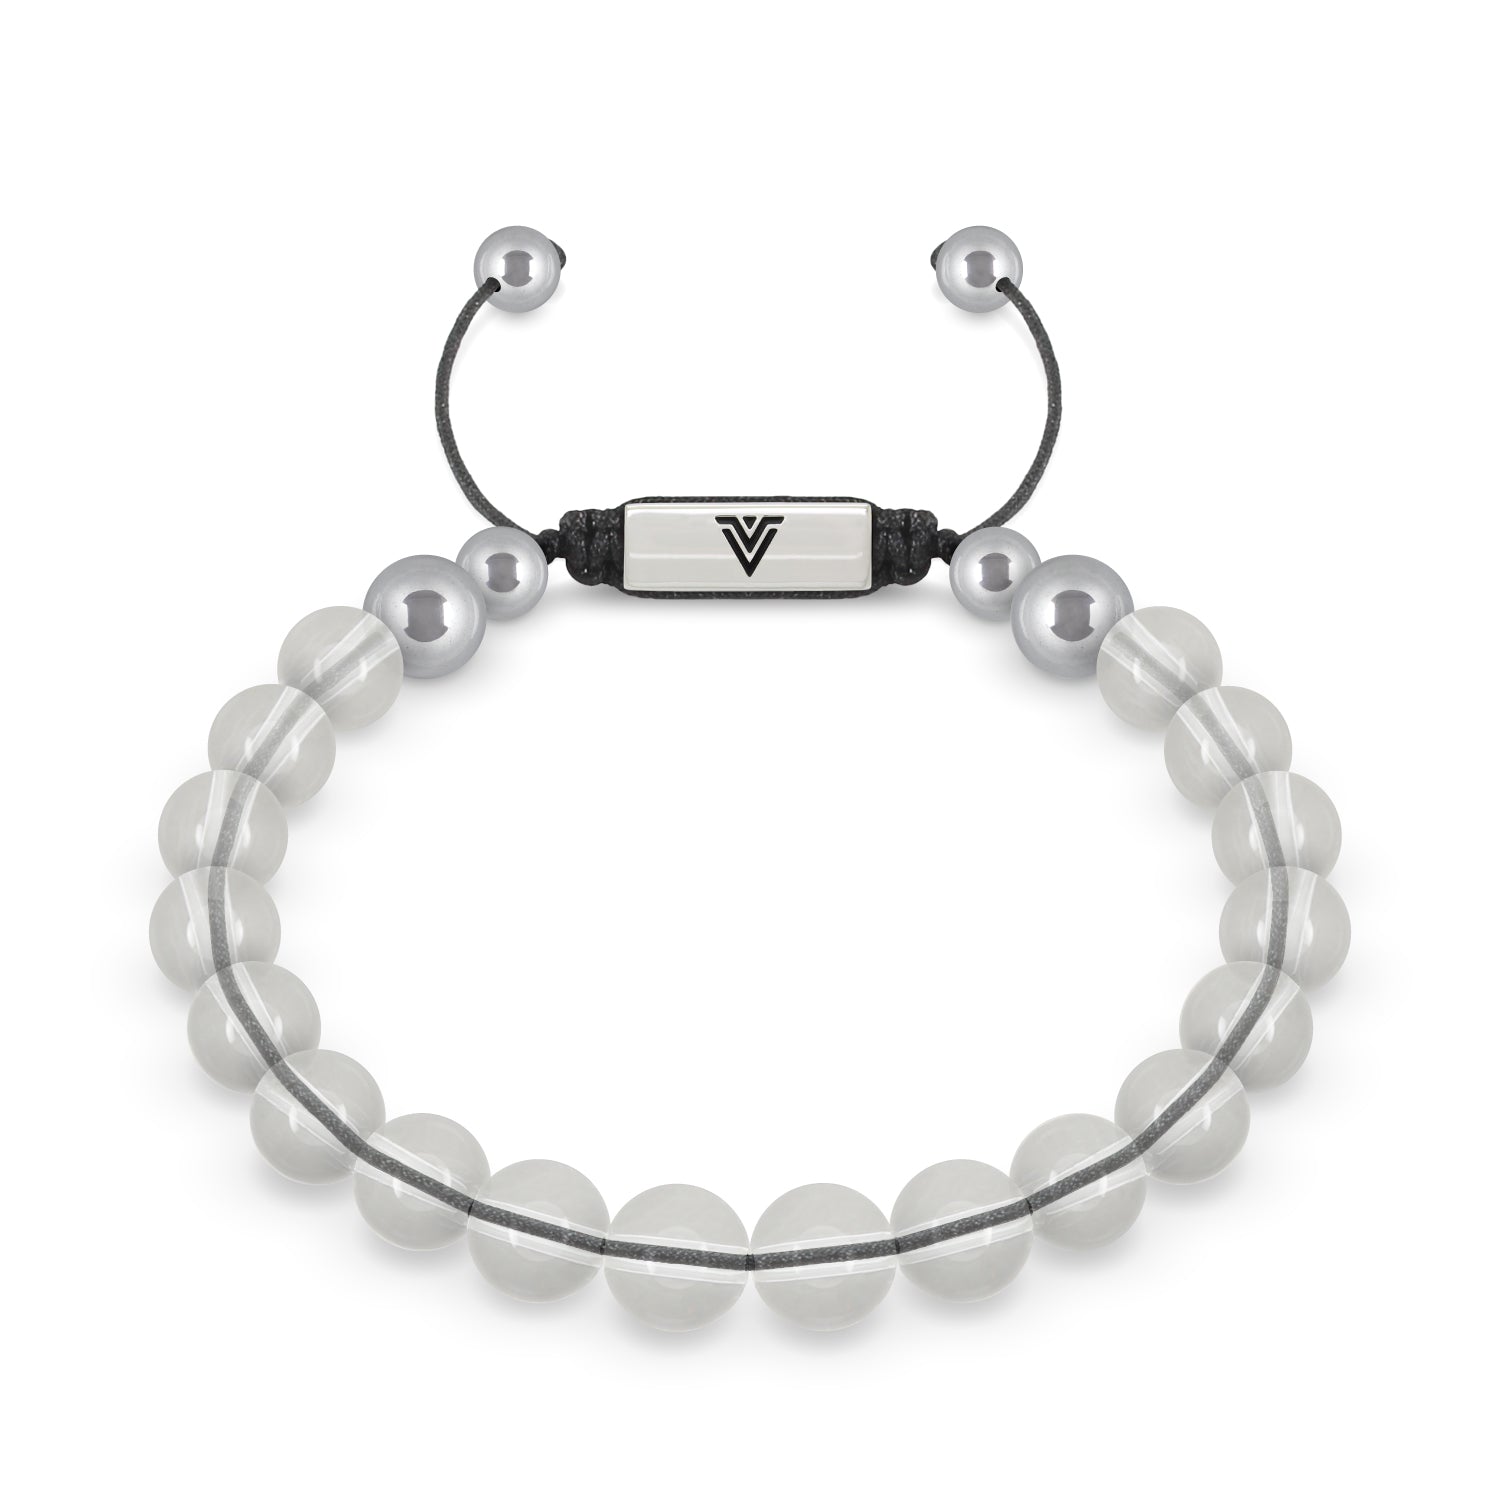 Front view of an 8mm Quartz beaded shamballa bracelet with silver stainless steel logo bead made by Voltlin